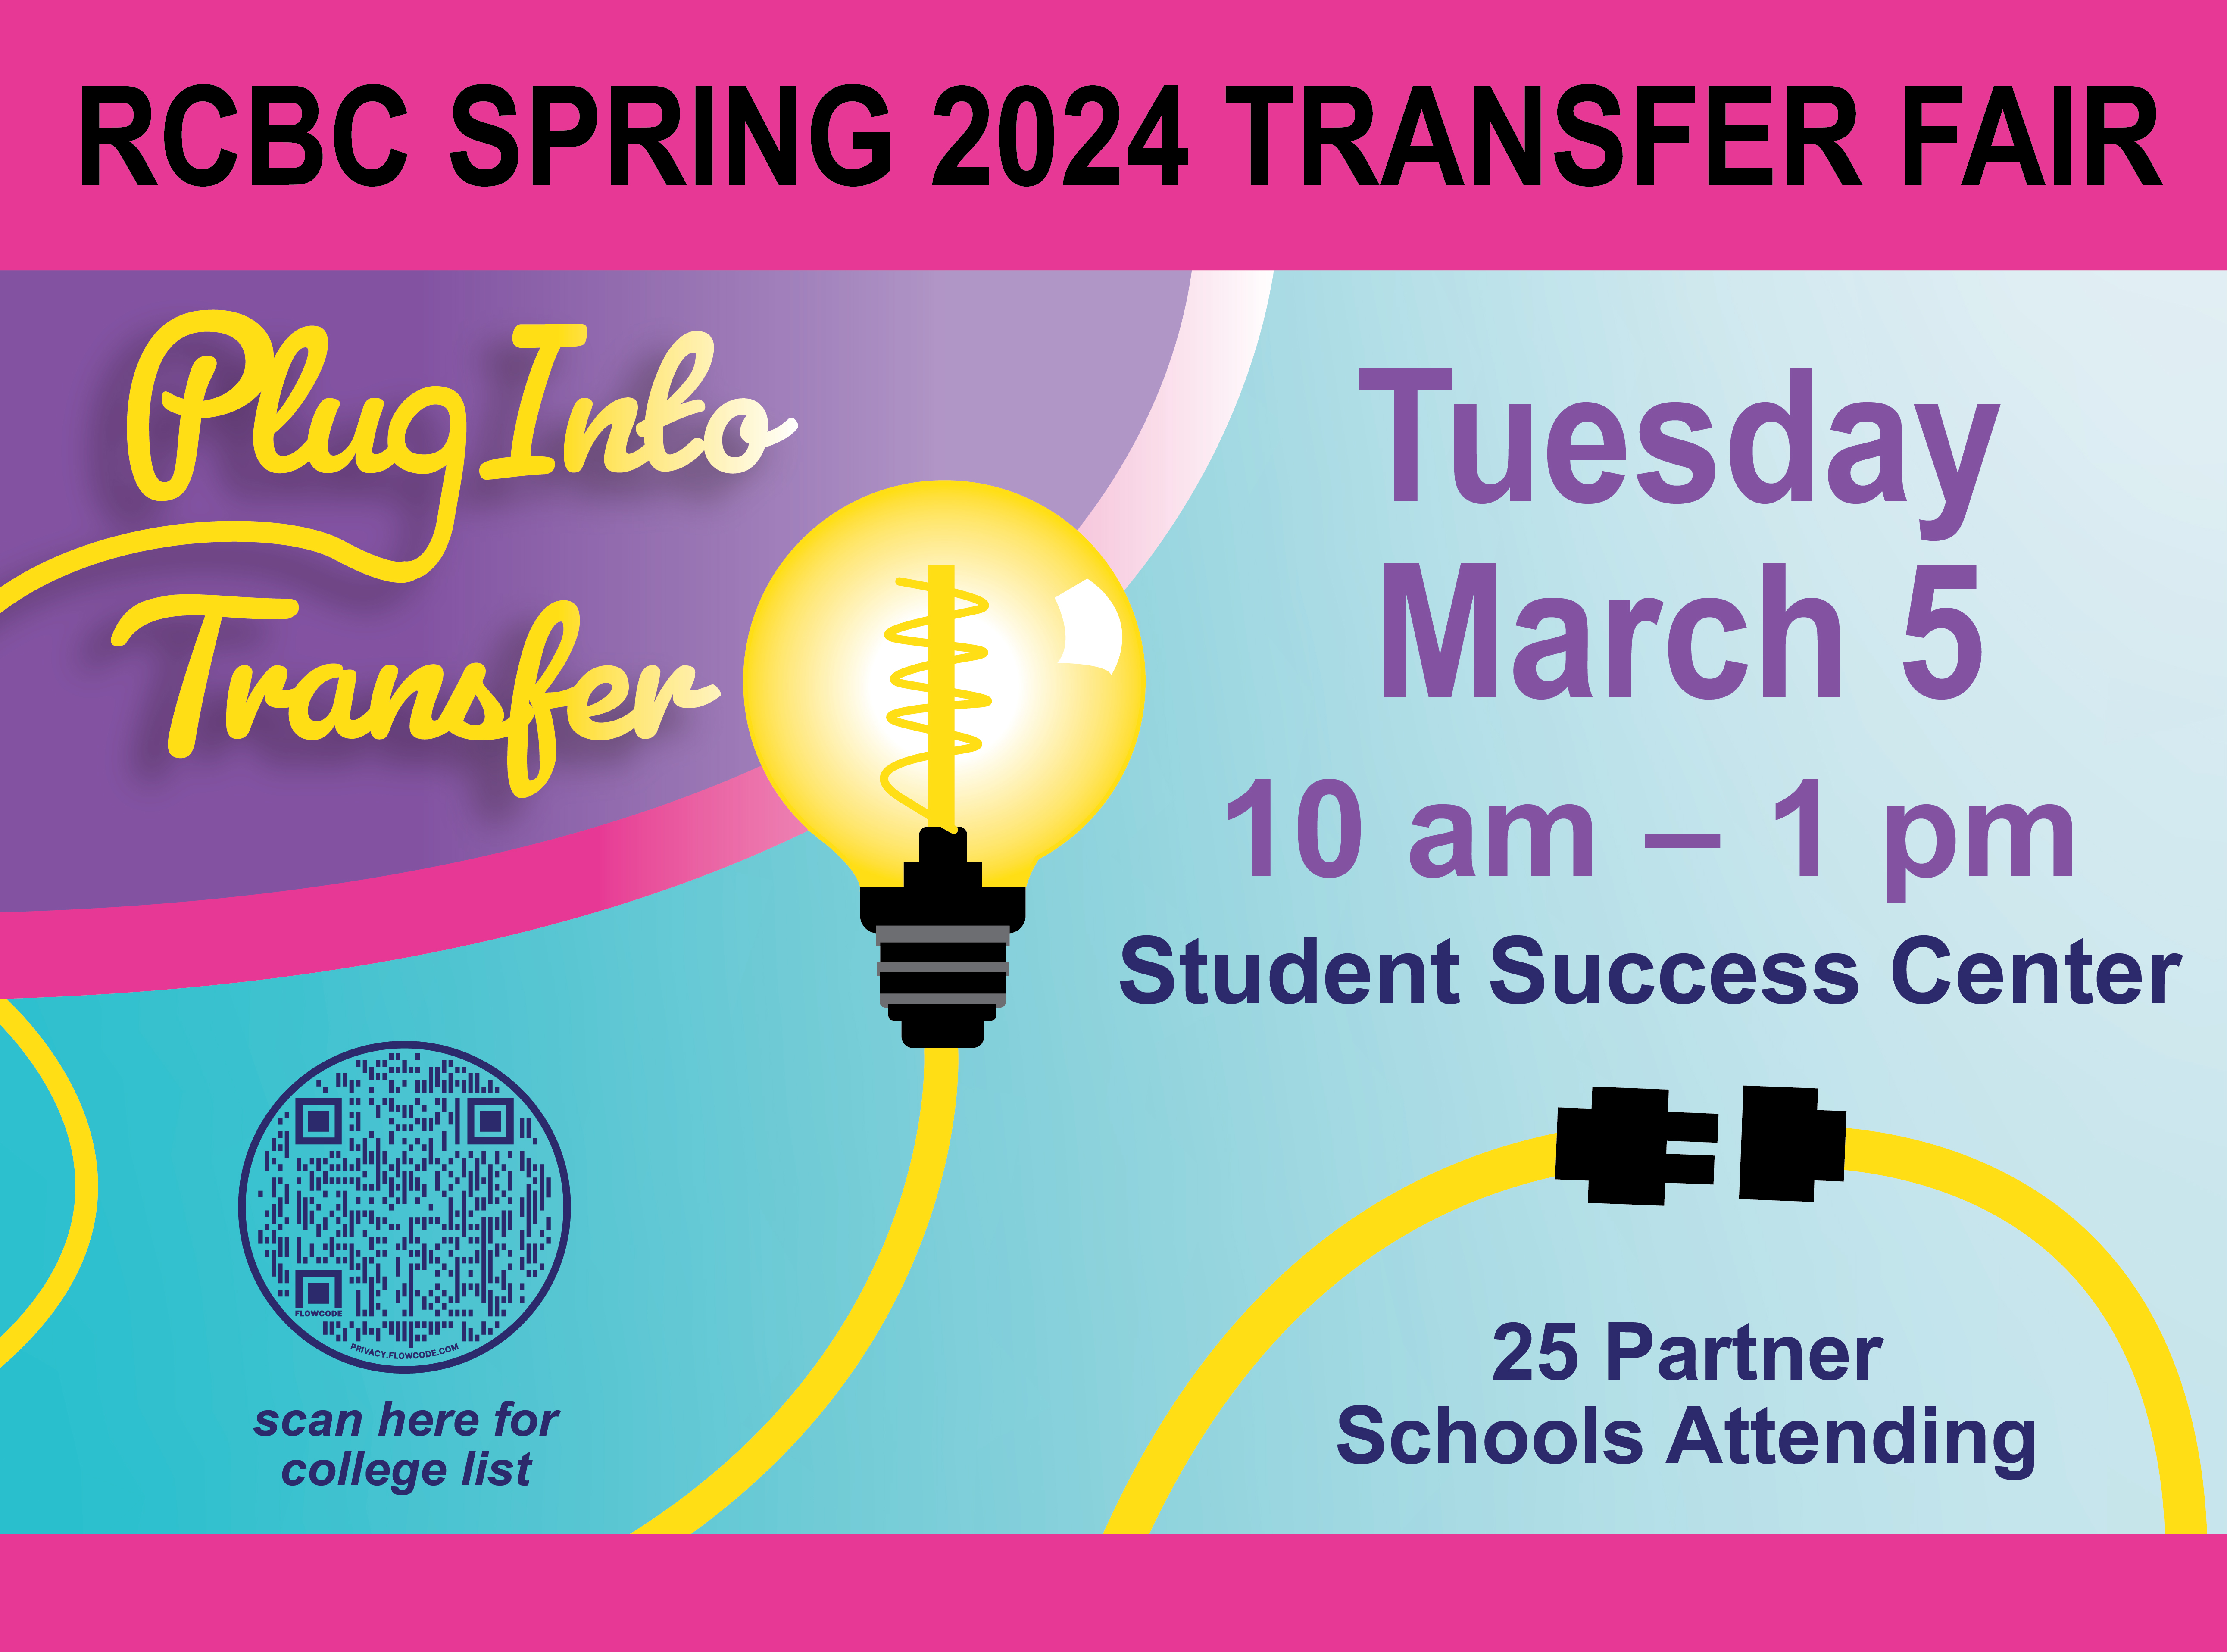 Spring Transfer Fair flyer for March 5 at 10 am in Student Success Center